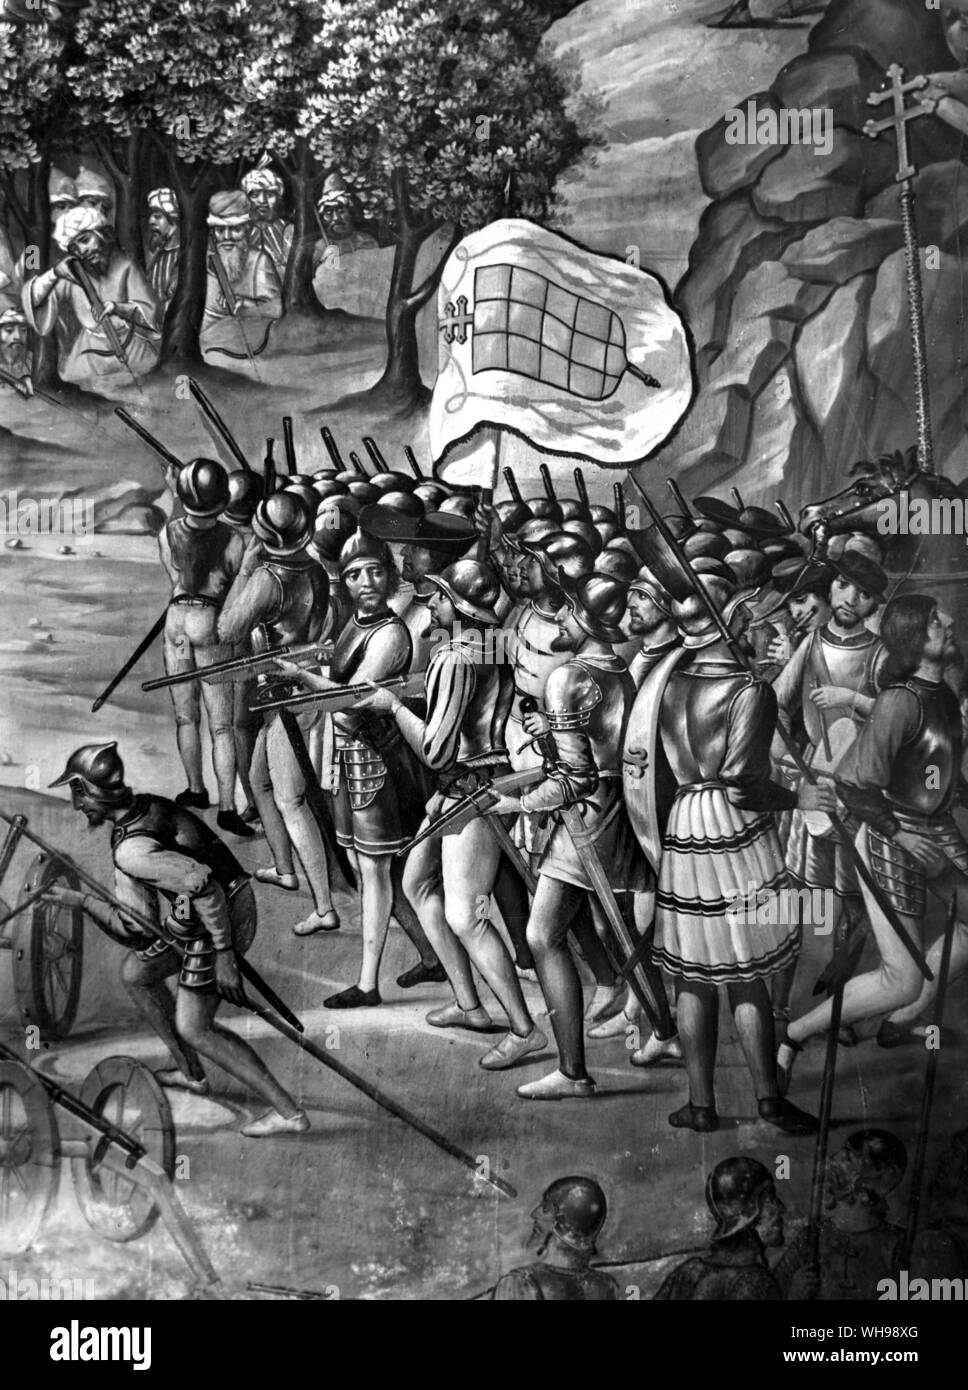 The Spanish became the dominant military power and founded a great empire overseas. A detail from a mural depicting the capture of Oran from the Moors. Stock Photo